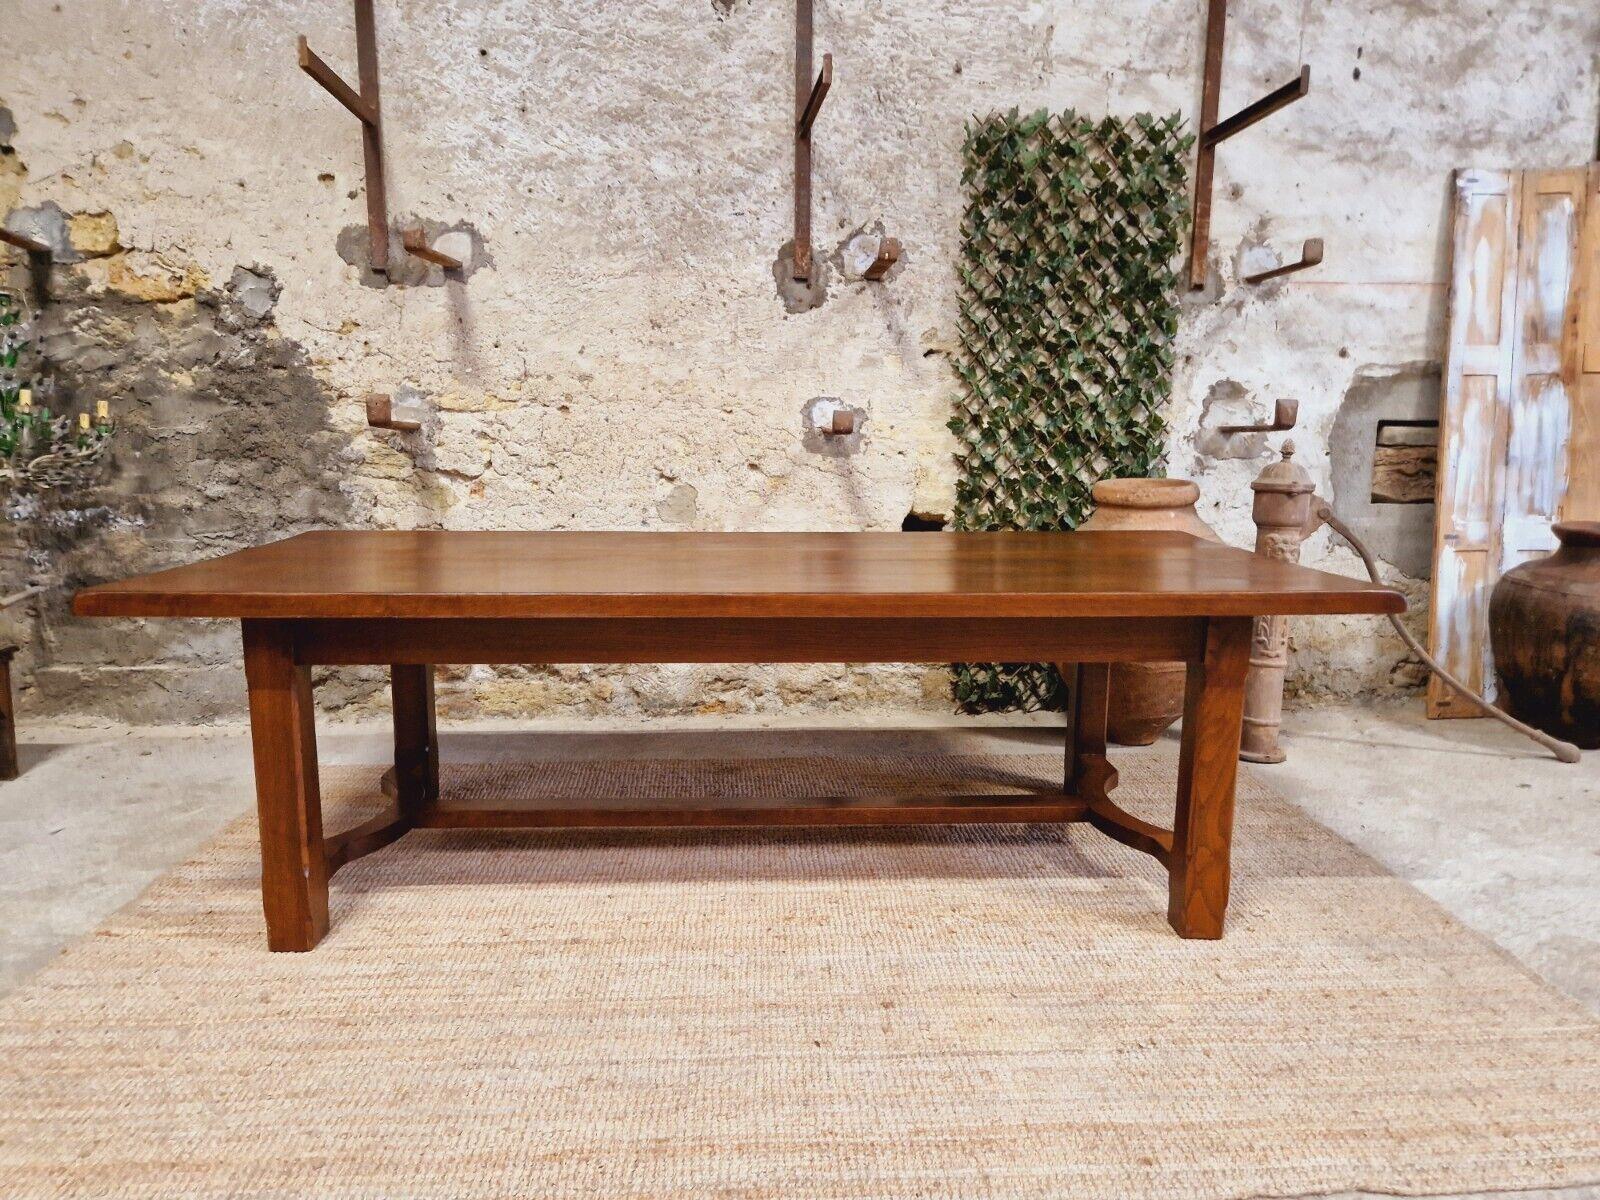 ROCAILLE ANTIQUES

This large French Rocaille dining table is an Fabulous piece of Vintage furniture that is in line the Brutalist style. Made of solid oak and dating back to mid 20th Century, it features a rectangular shape and can seat up to 8